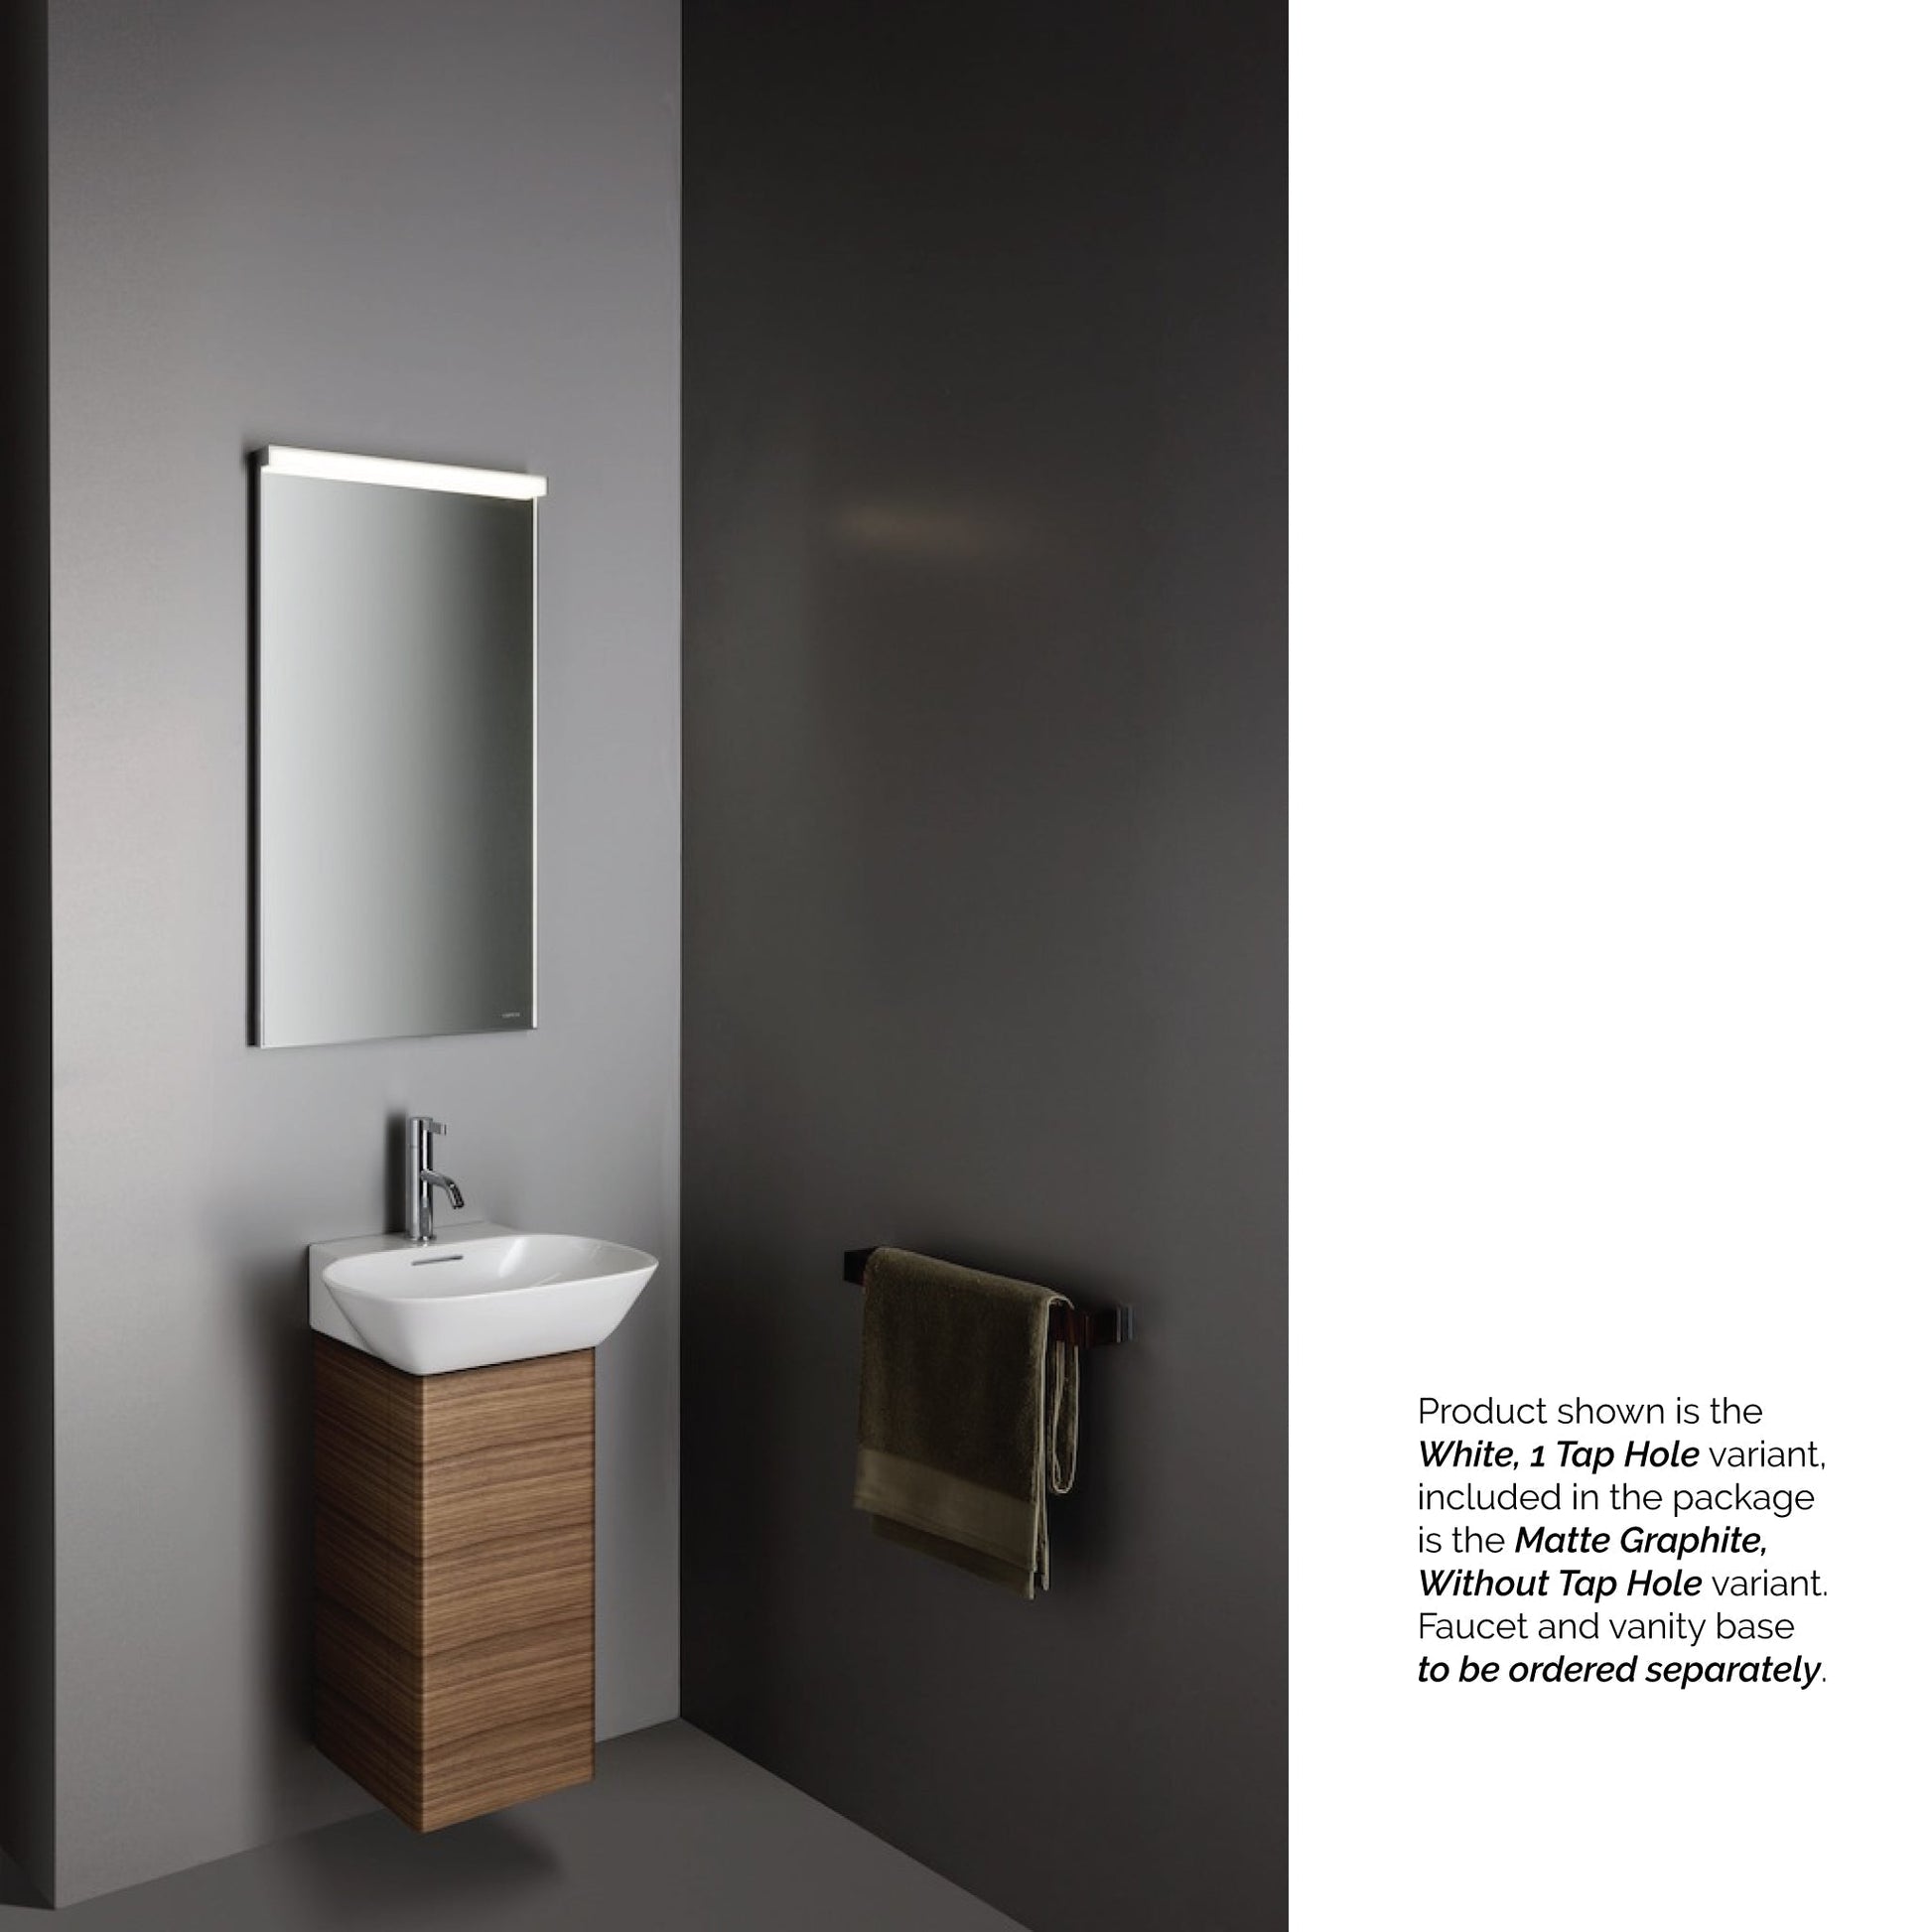 Laufen Ino 18" x 16" Rectangular Matte Graphite Wall-Mounted Bathroom Sink Without Faucet Hole